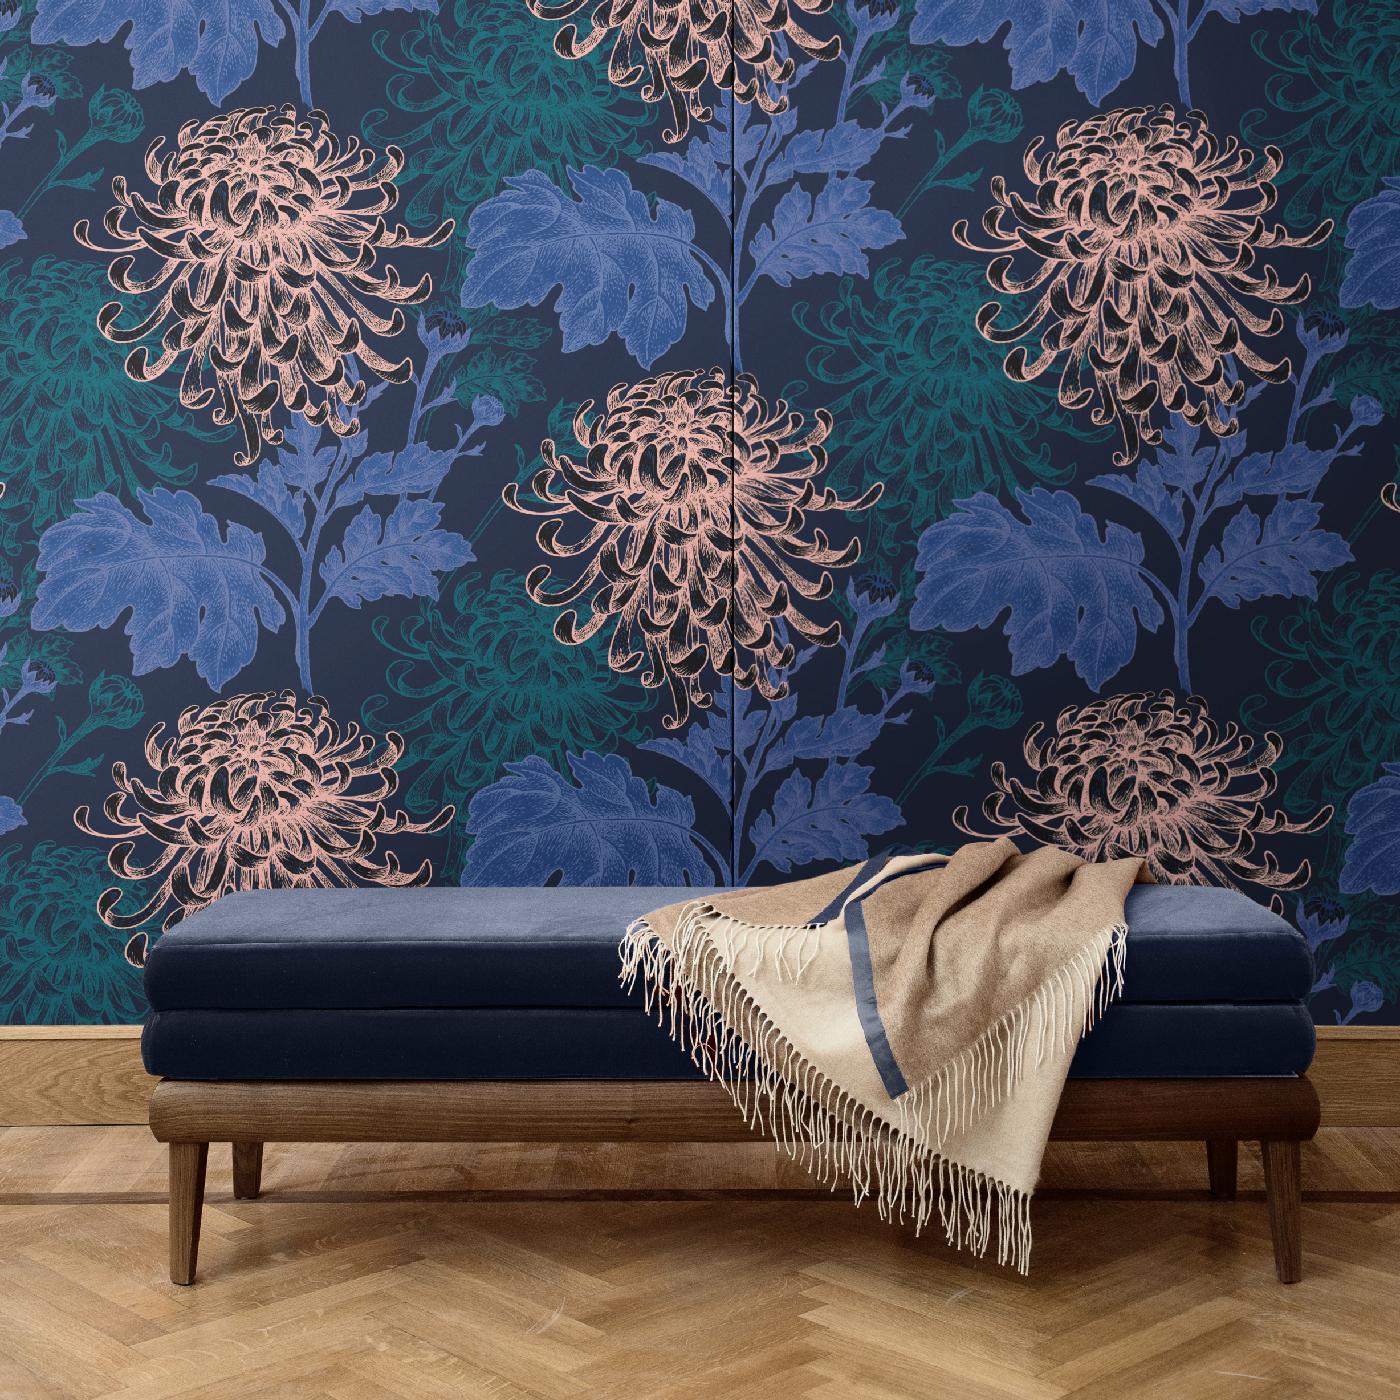 Part of the Mixed Dahlia collection, this superb wall covering boasts an exquisite juxtaposition of dahlias and leaves, displaying three different hues over a dramatic dark background. This unique decoration will make a statement in any room in the